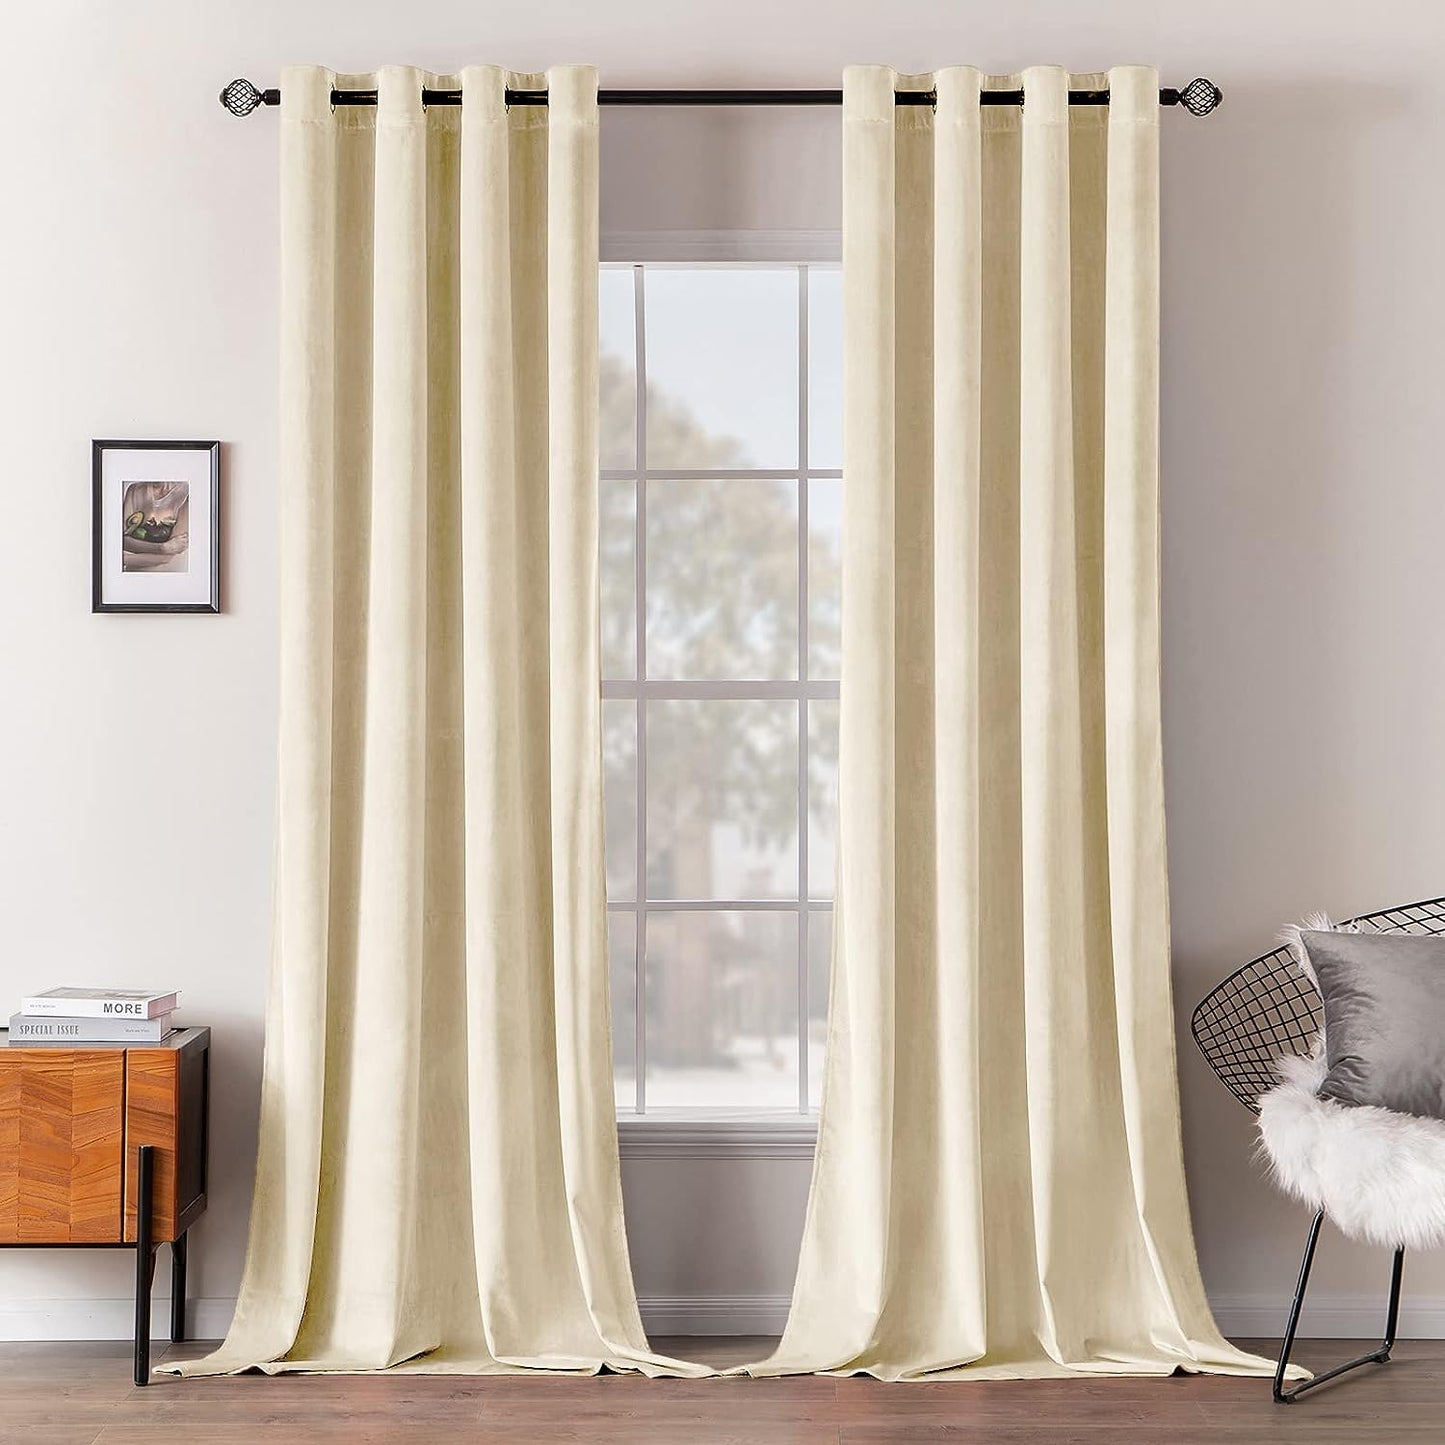 MIULEE Velvet Curtains Olive Green Elegant Grommet Curtains Thermal Insulated Soundproof Room Darkening Curtains/Drapes for Classical Living Room Bedroom Decor 52 X 84 Inch Set of 2  MIULEE Ivory White W52 X L96 